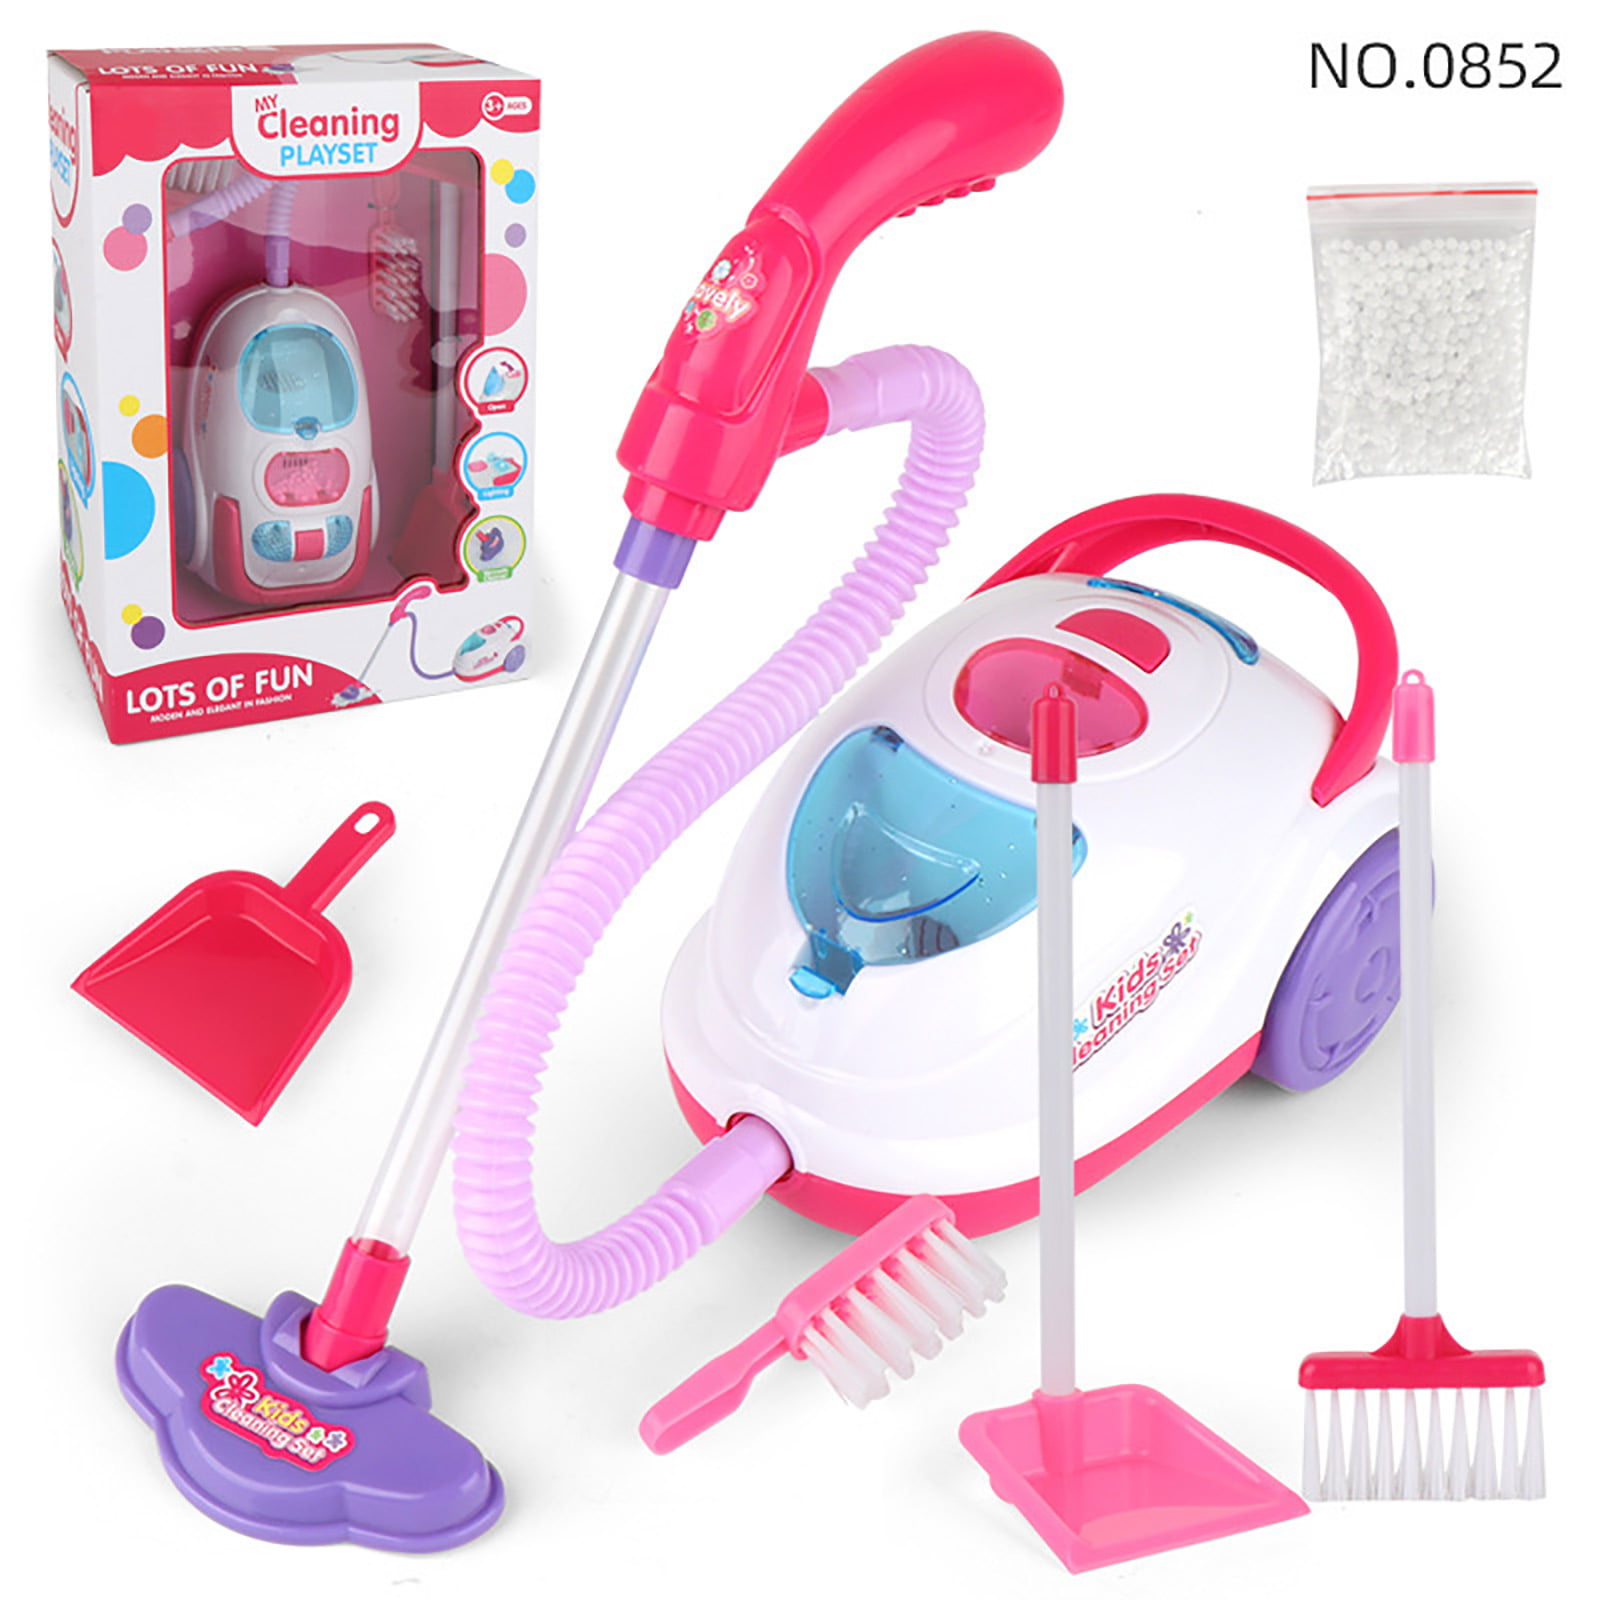 Simulation Plastic Home Vacuum Cleaner Model Kids Role Play Pretend Toys 